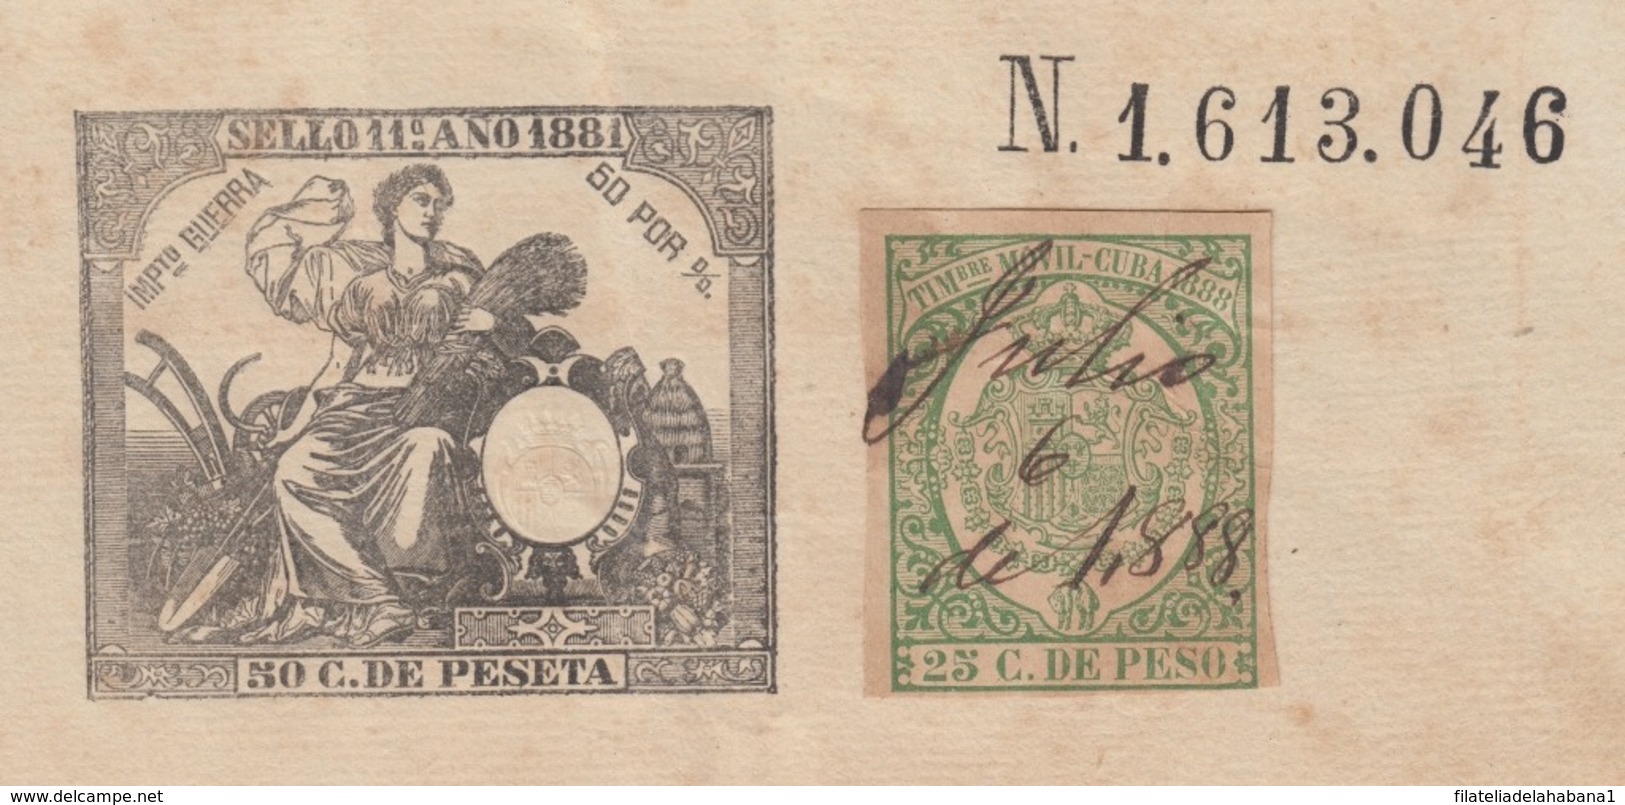 TMO-51 CUBA (LG1515) SPAIN ANT. REVENUE 1881 SEALLED PAPER + TIMBRE MOVIL 1886. - Strafport